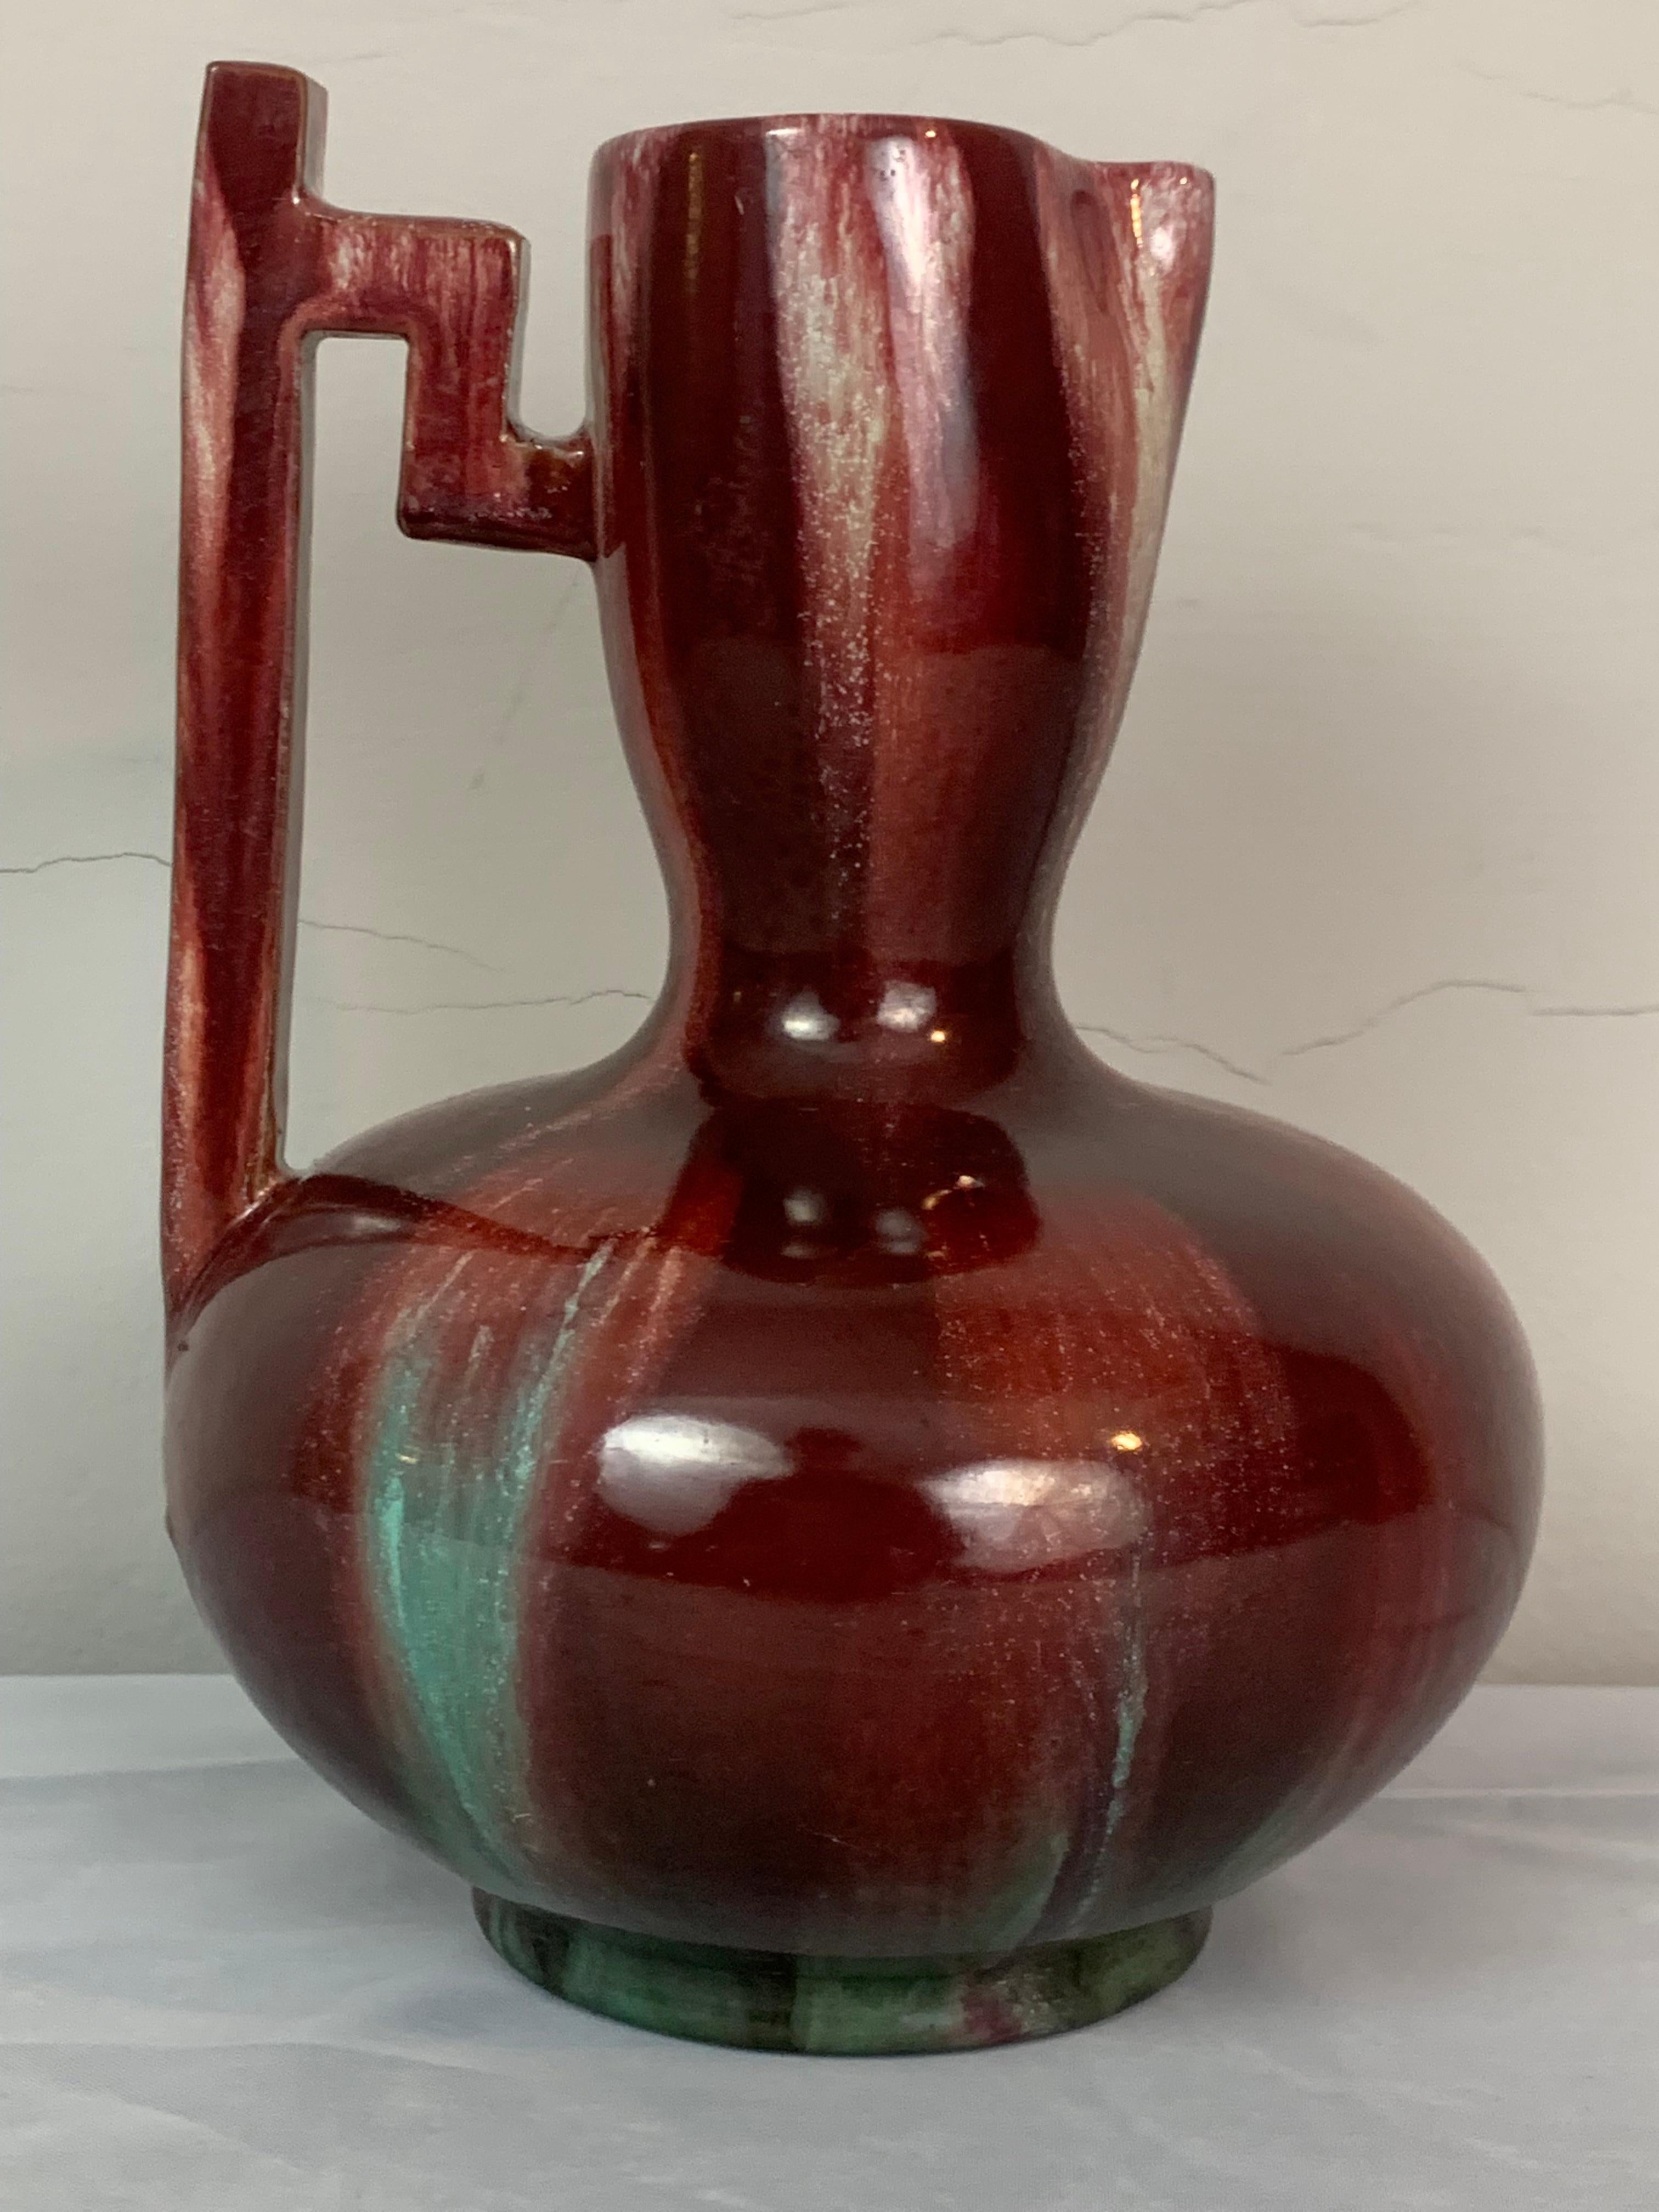 Circa 19th century French Art Nouveau ceramic earthenware jug or vase by Clément Massier. The vase features a wonderful glaze with a trickle down effect of white and turquoise over an ox blood base. The wonderful angled handled sits on one side of